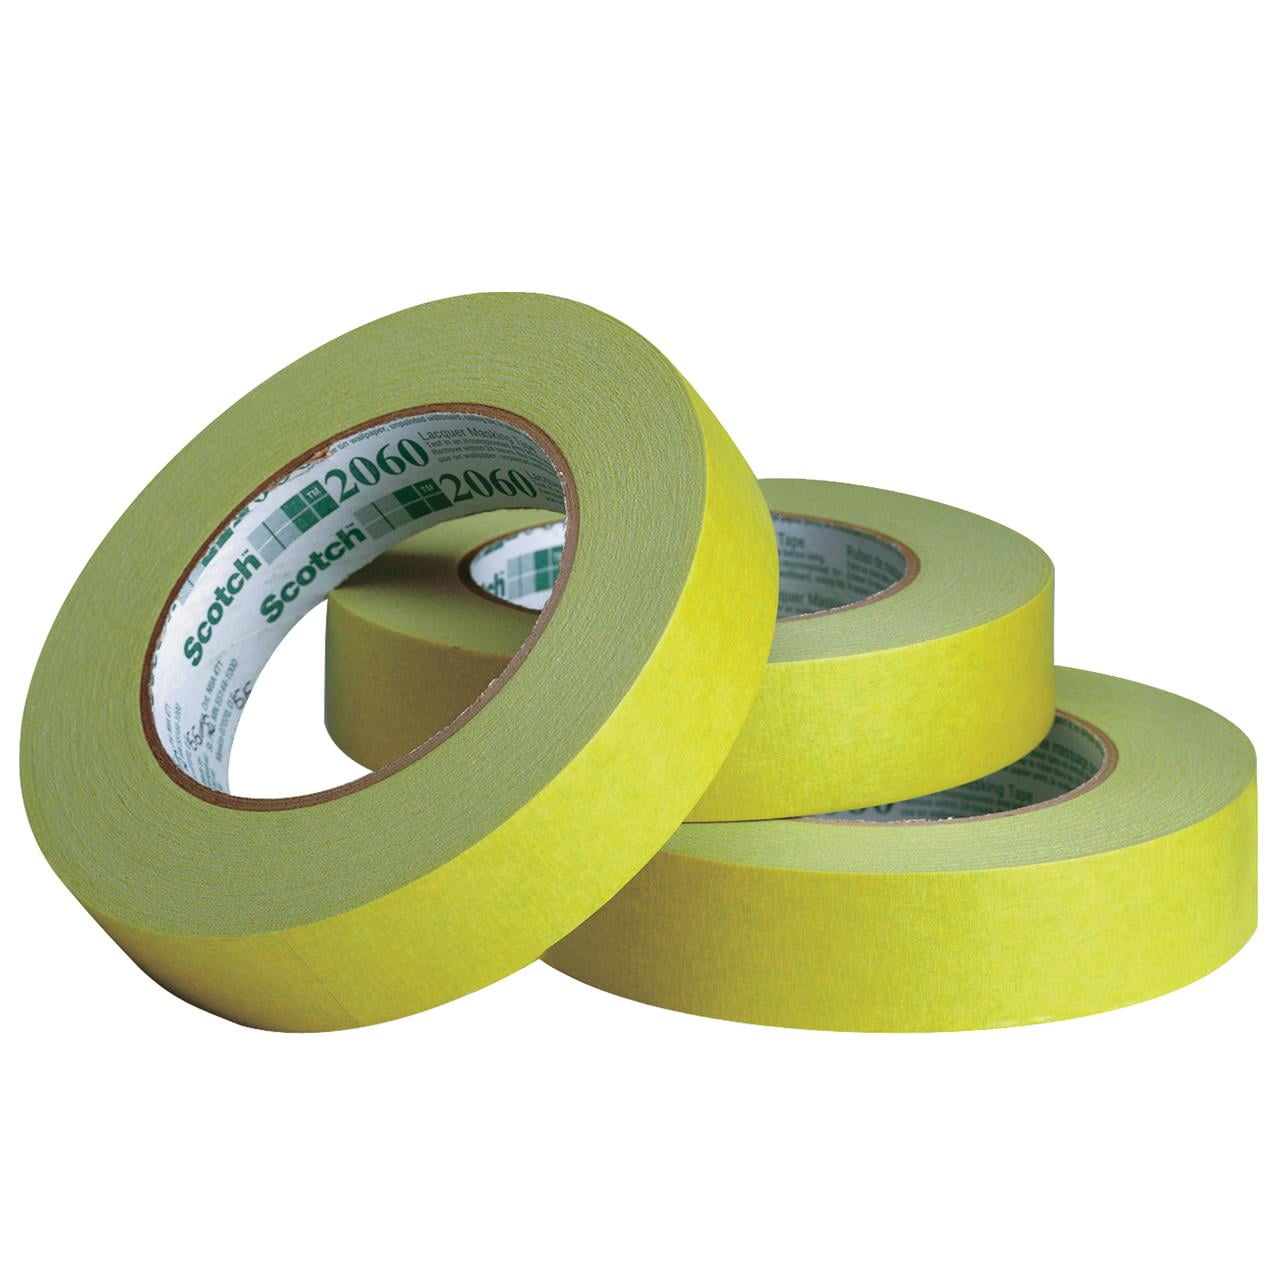 Scotch T937206012pk 2 In. X 60 Yards 2060 Masking Tape, Green - Pack Of 12